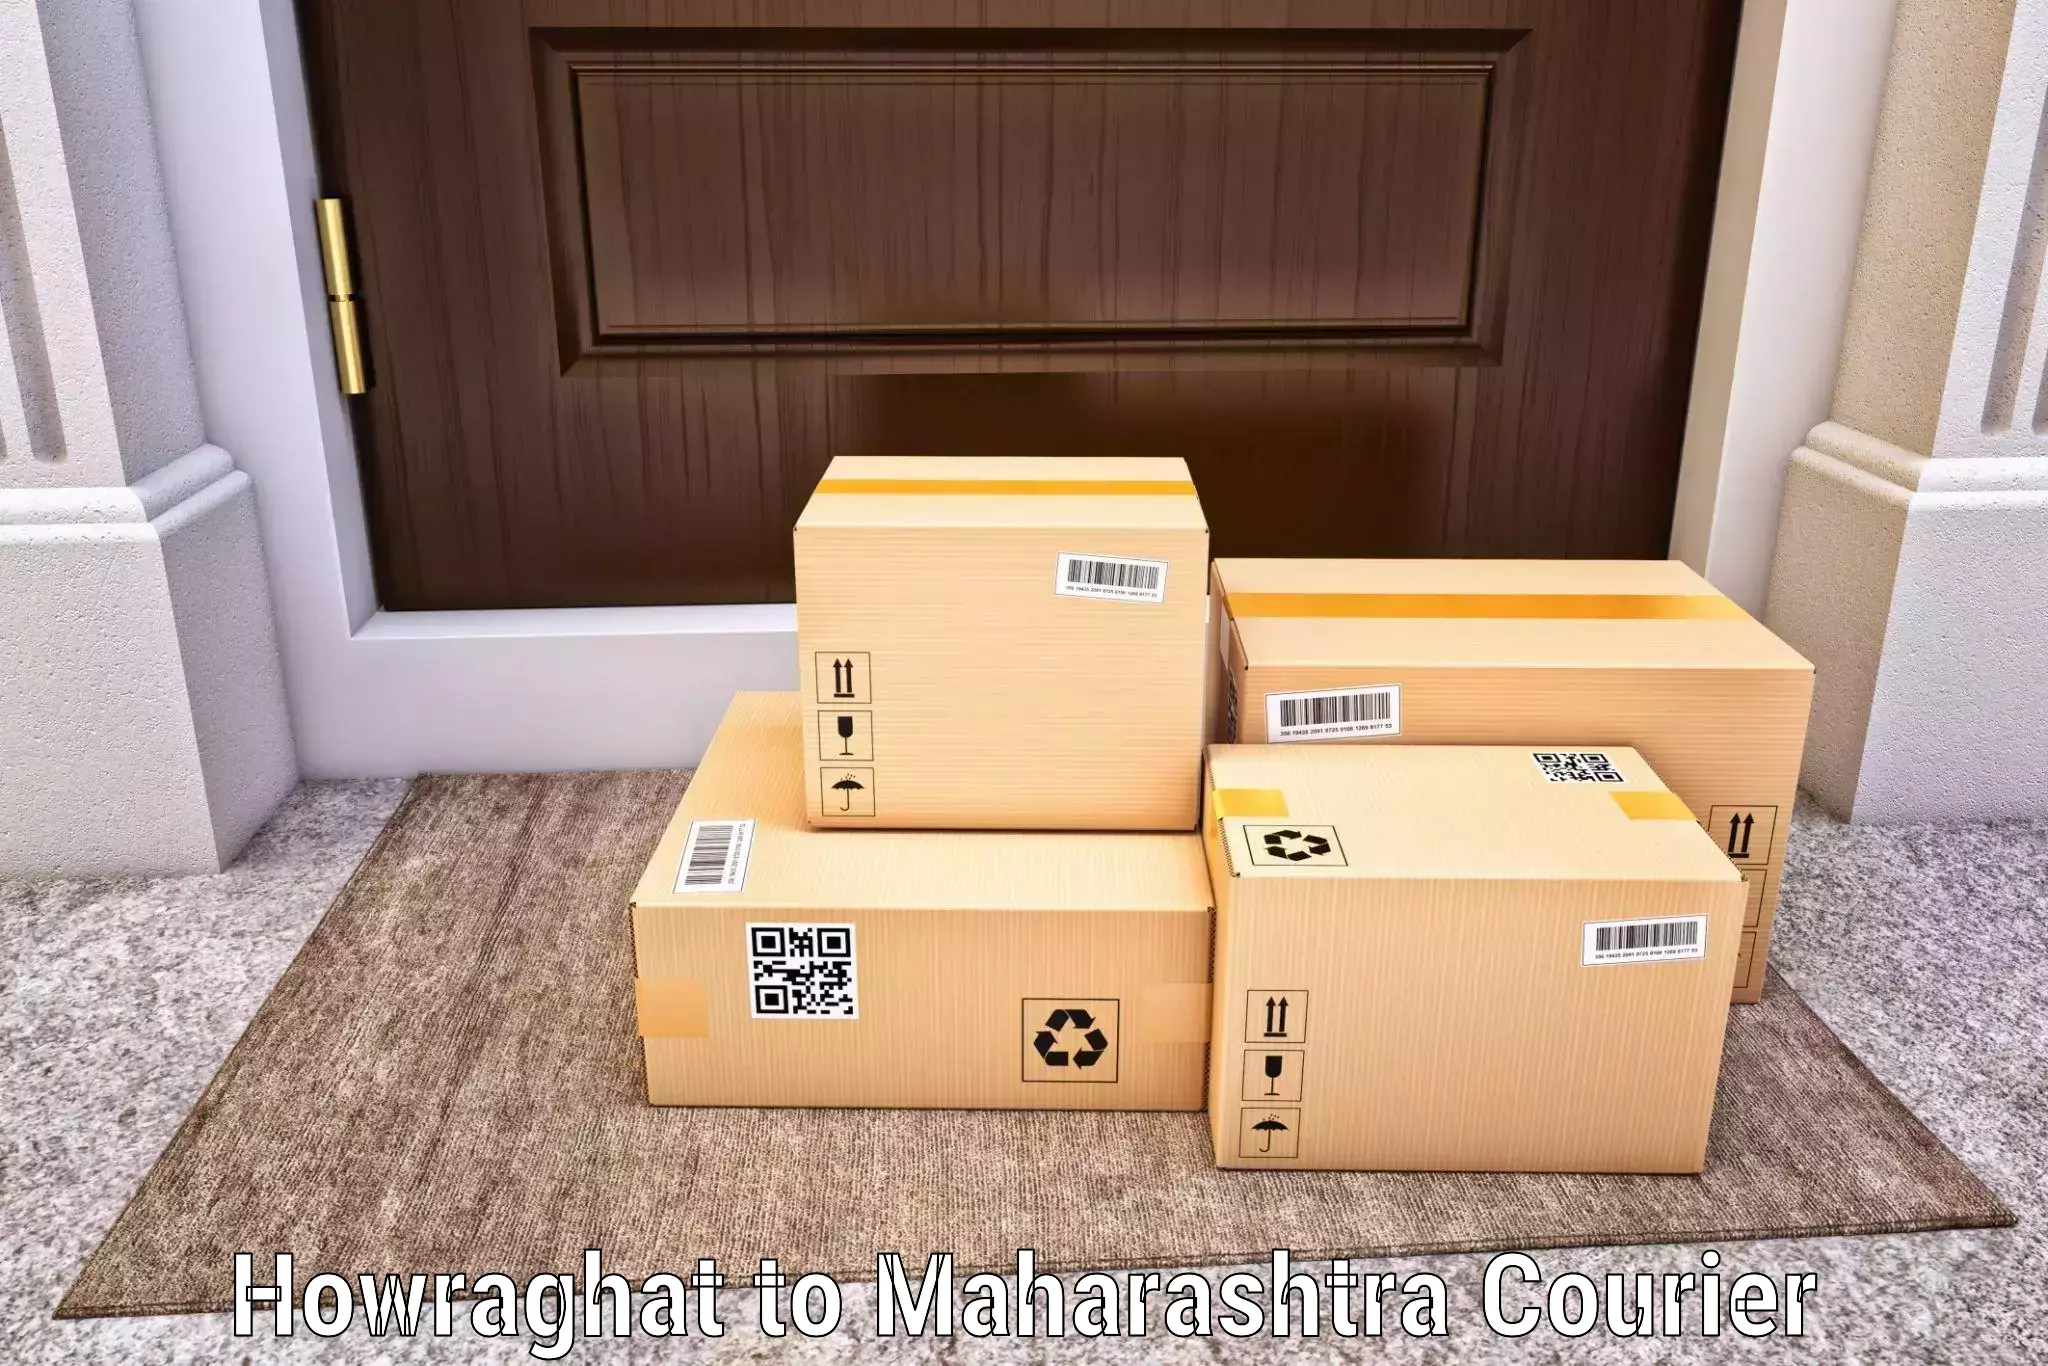 Bulk order courier in Howraghat to Washim